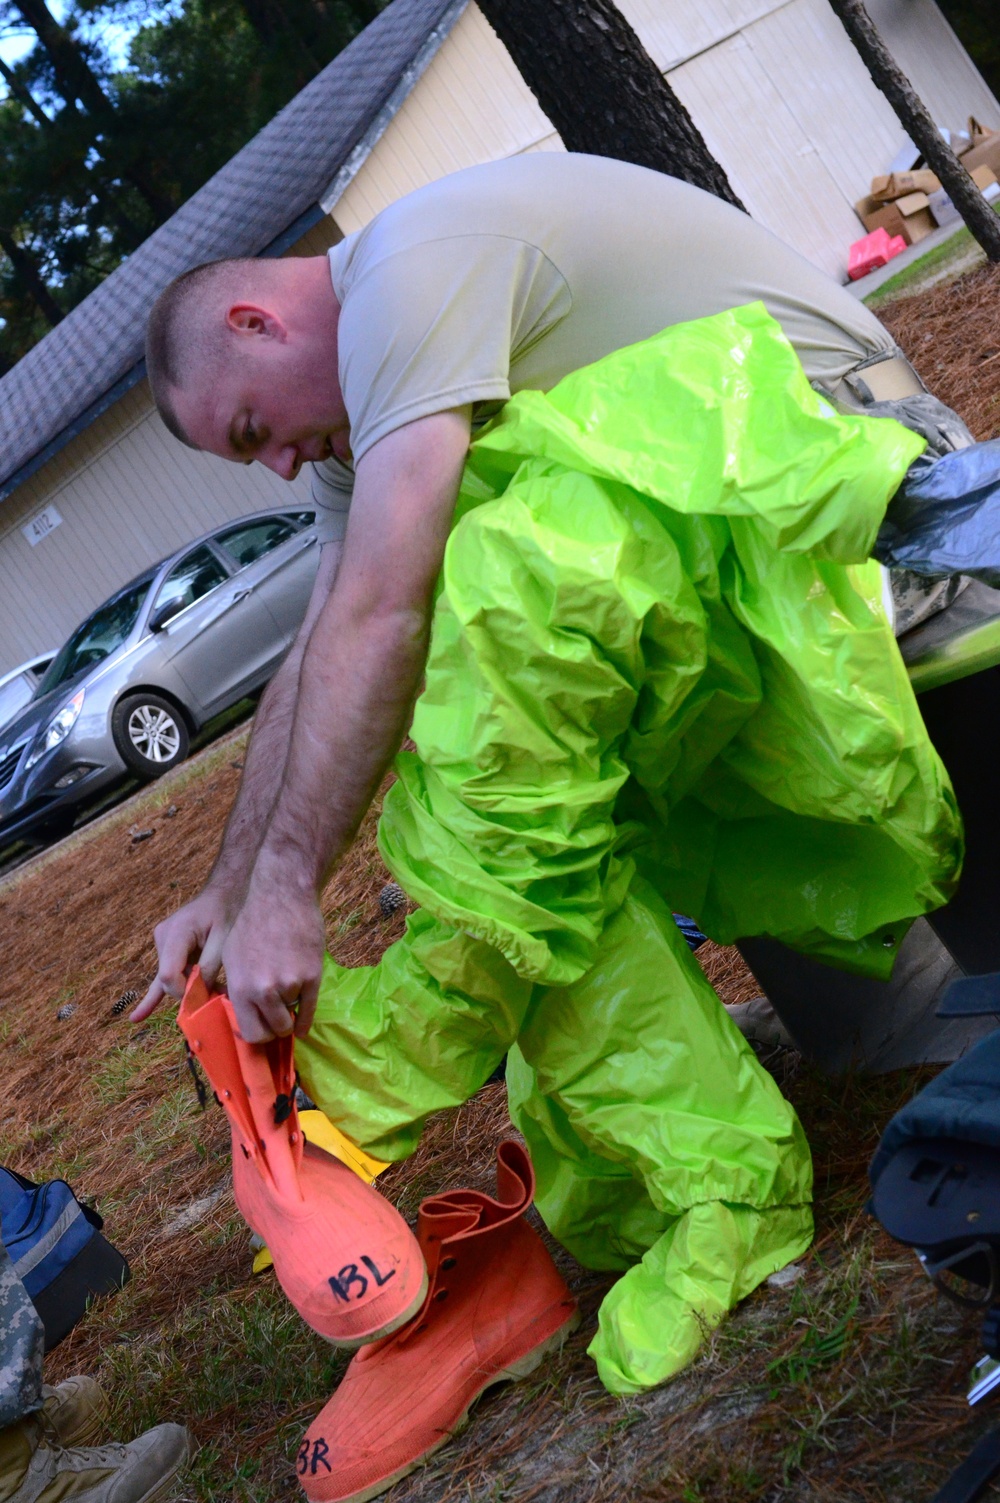 Army, NG Firefighters 'suit up' for HAZMAT